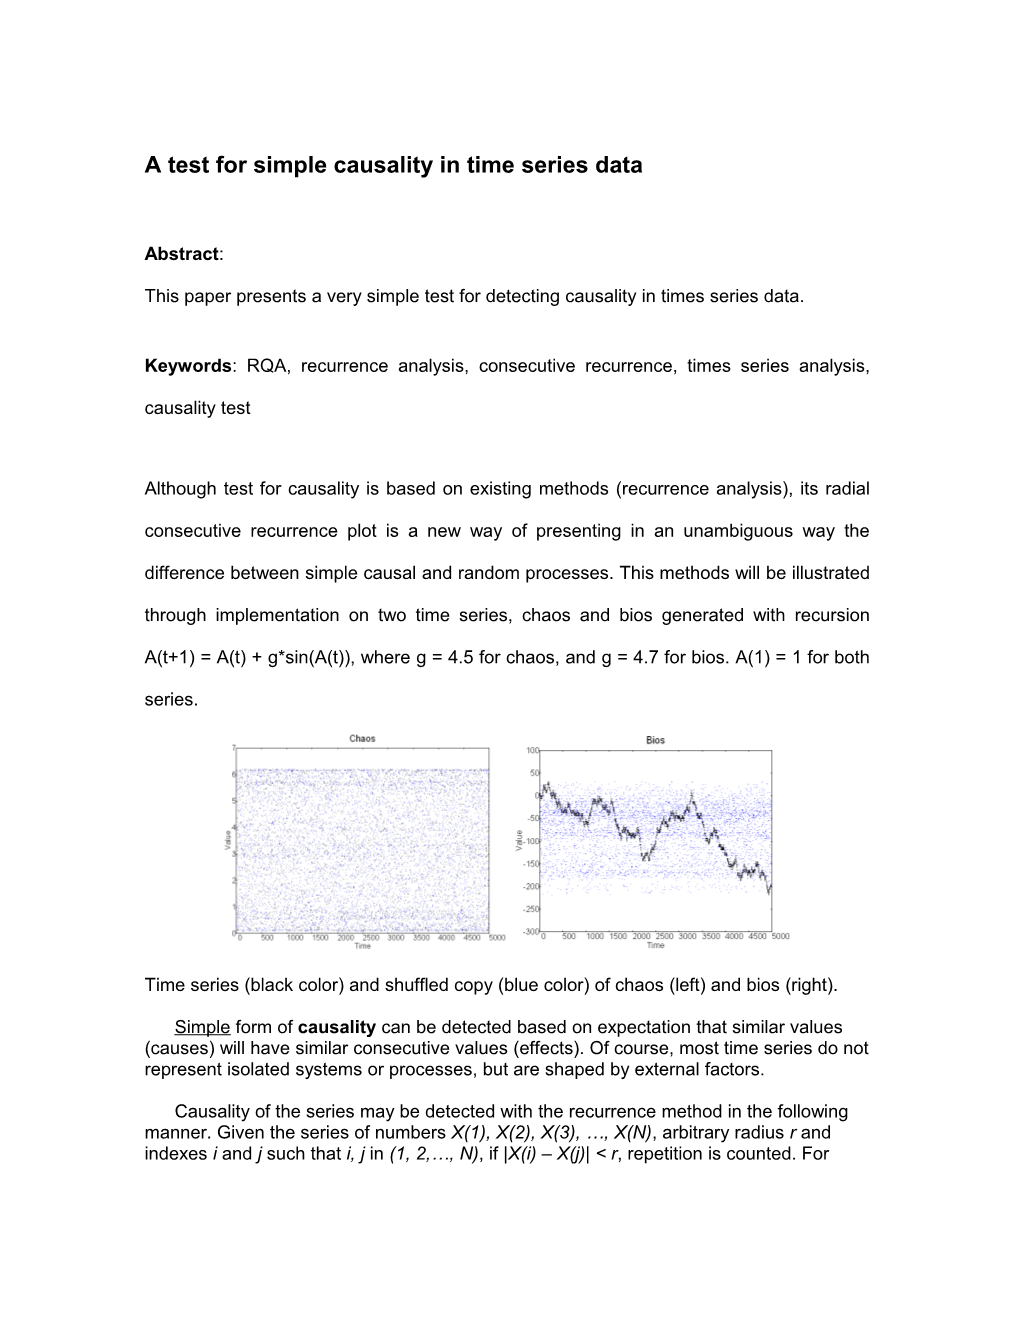 A Test for Simple Causality in Time Series Data